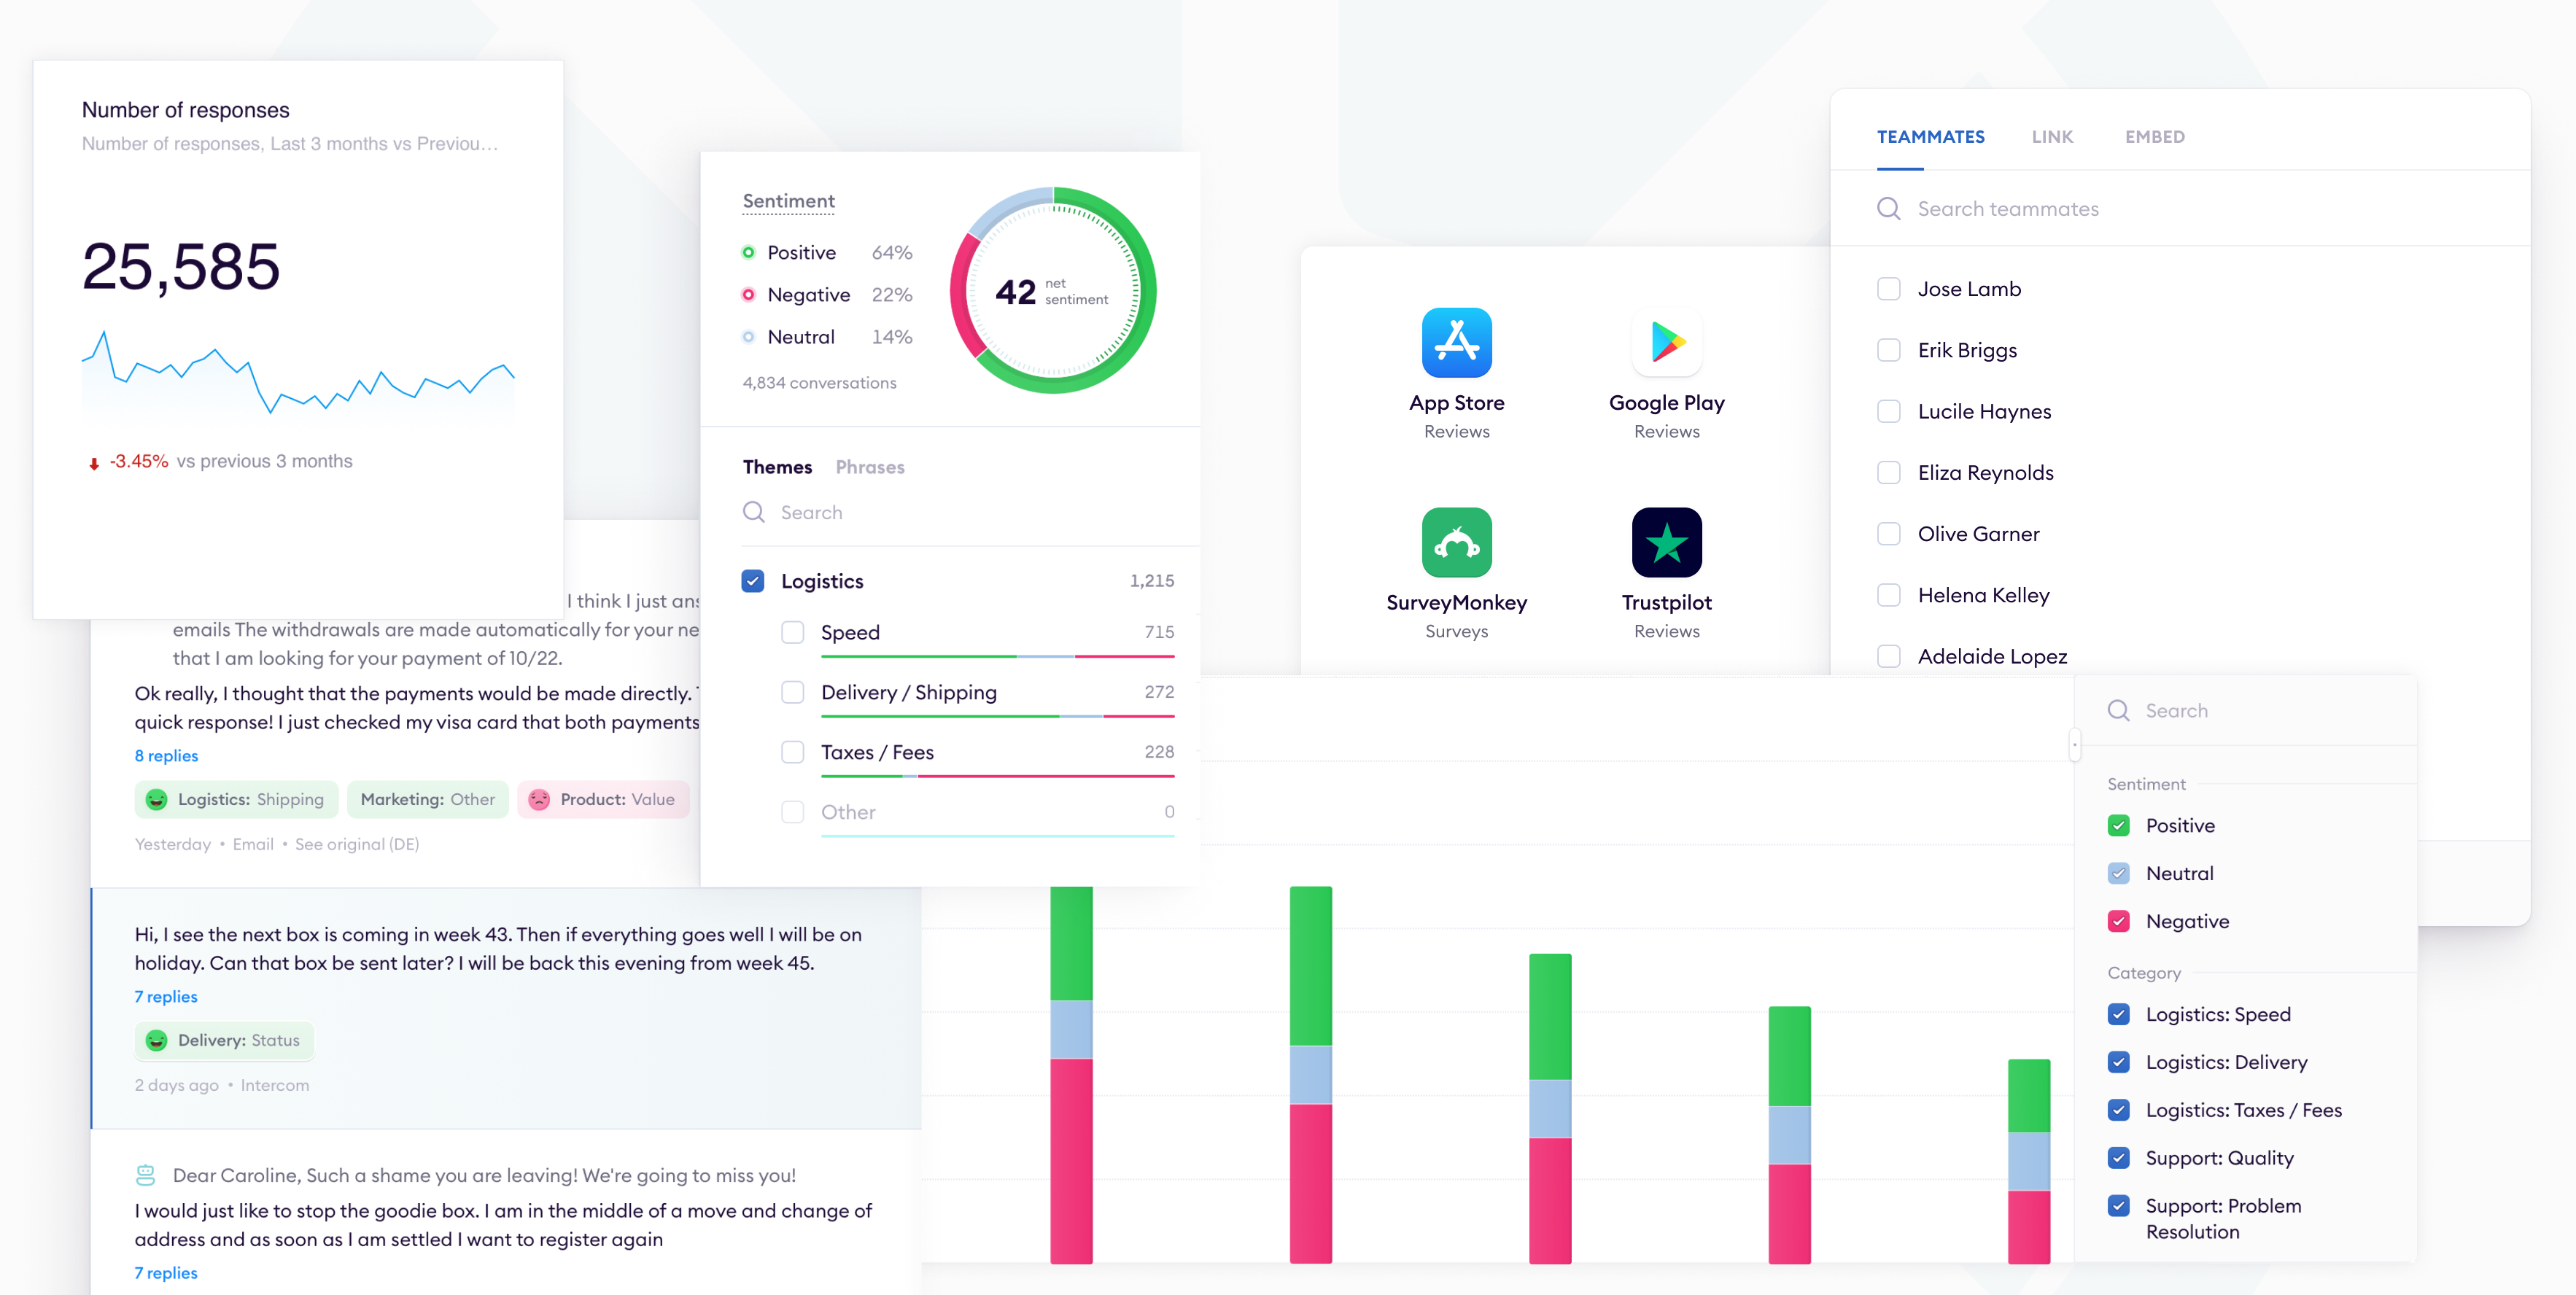 Chattermill, which uses AI to extract insights from customer experience data, raises $26M